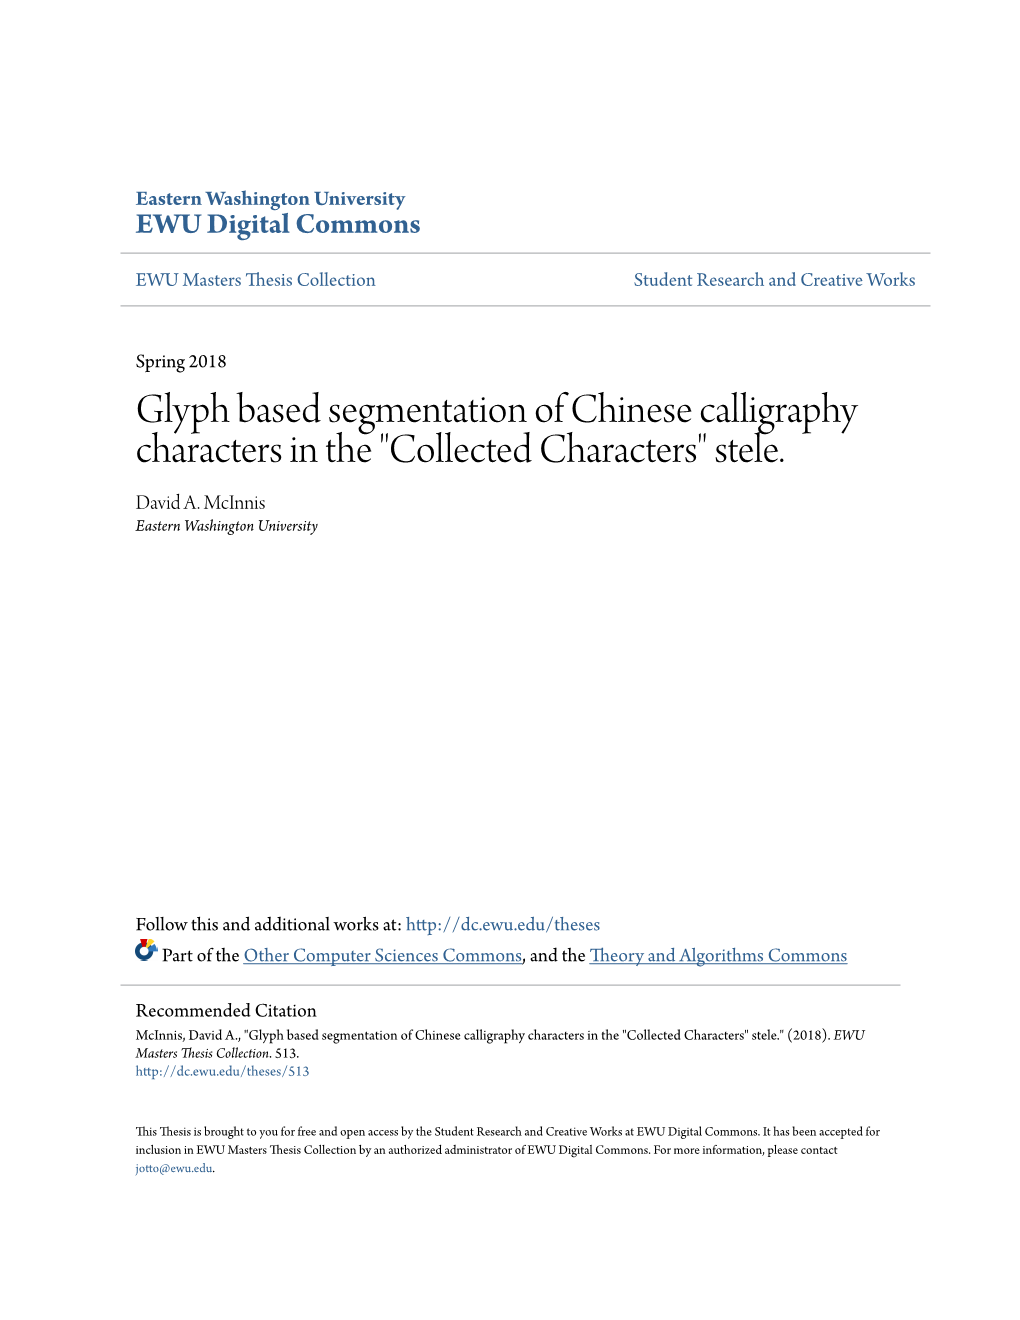 Glyph Based Segmentation of Chinese Calligraphy Characters in the "Collected Characters" Stele